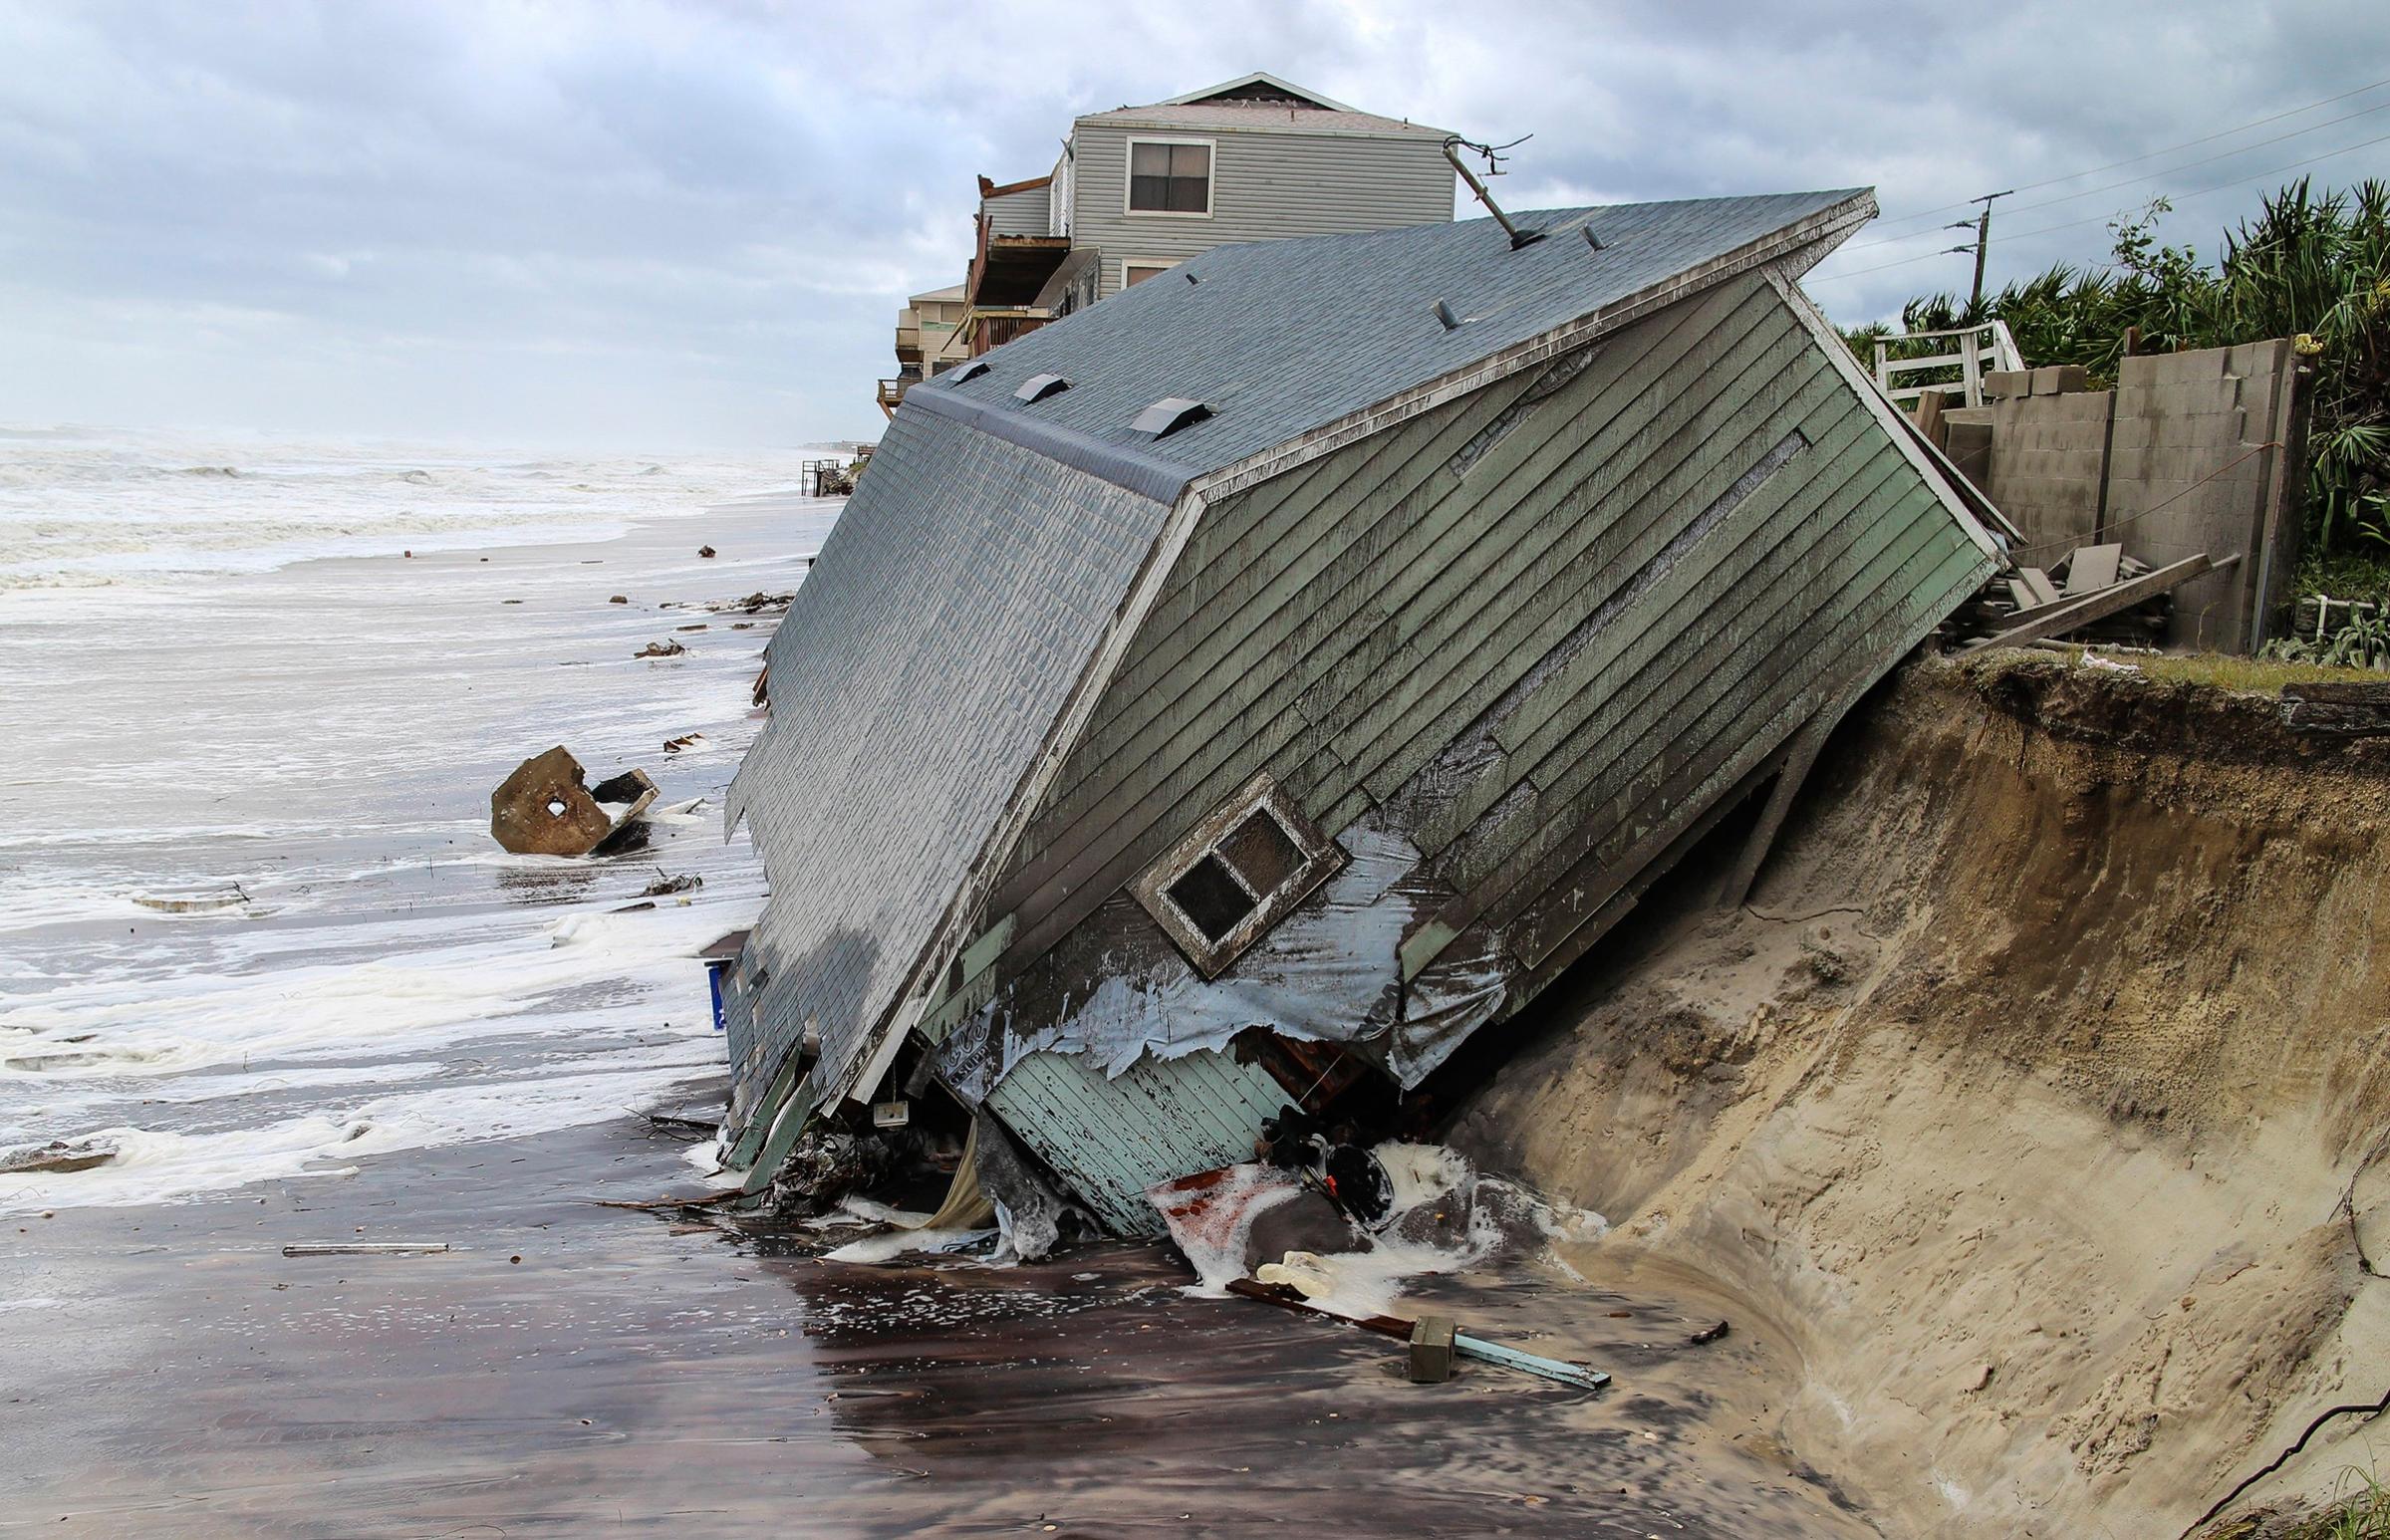 A house slides into the ocean on the Atlantic Coast—one more home built too close to danger